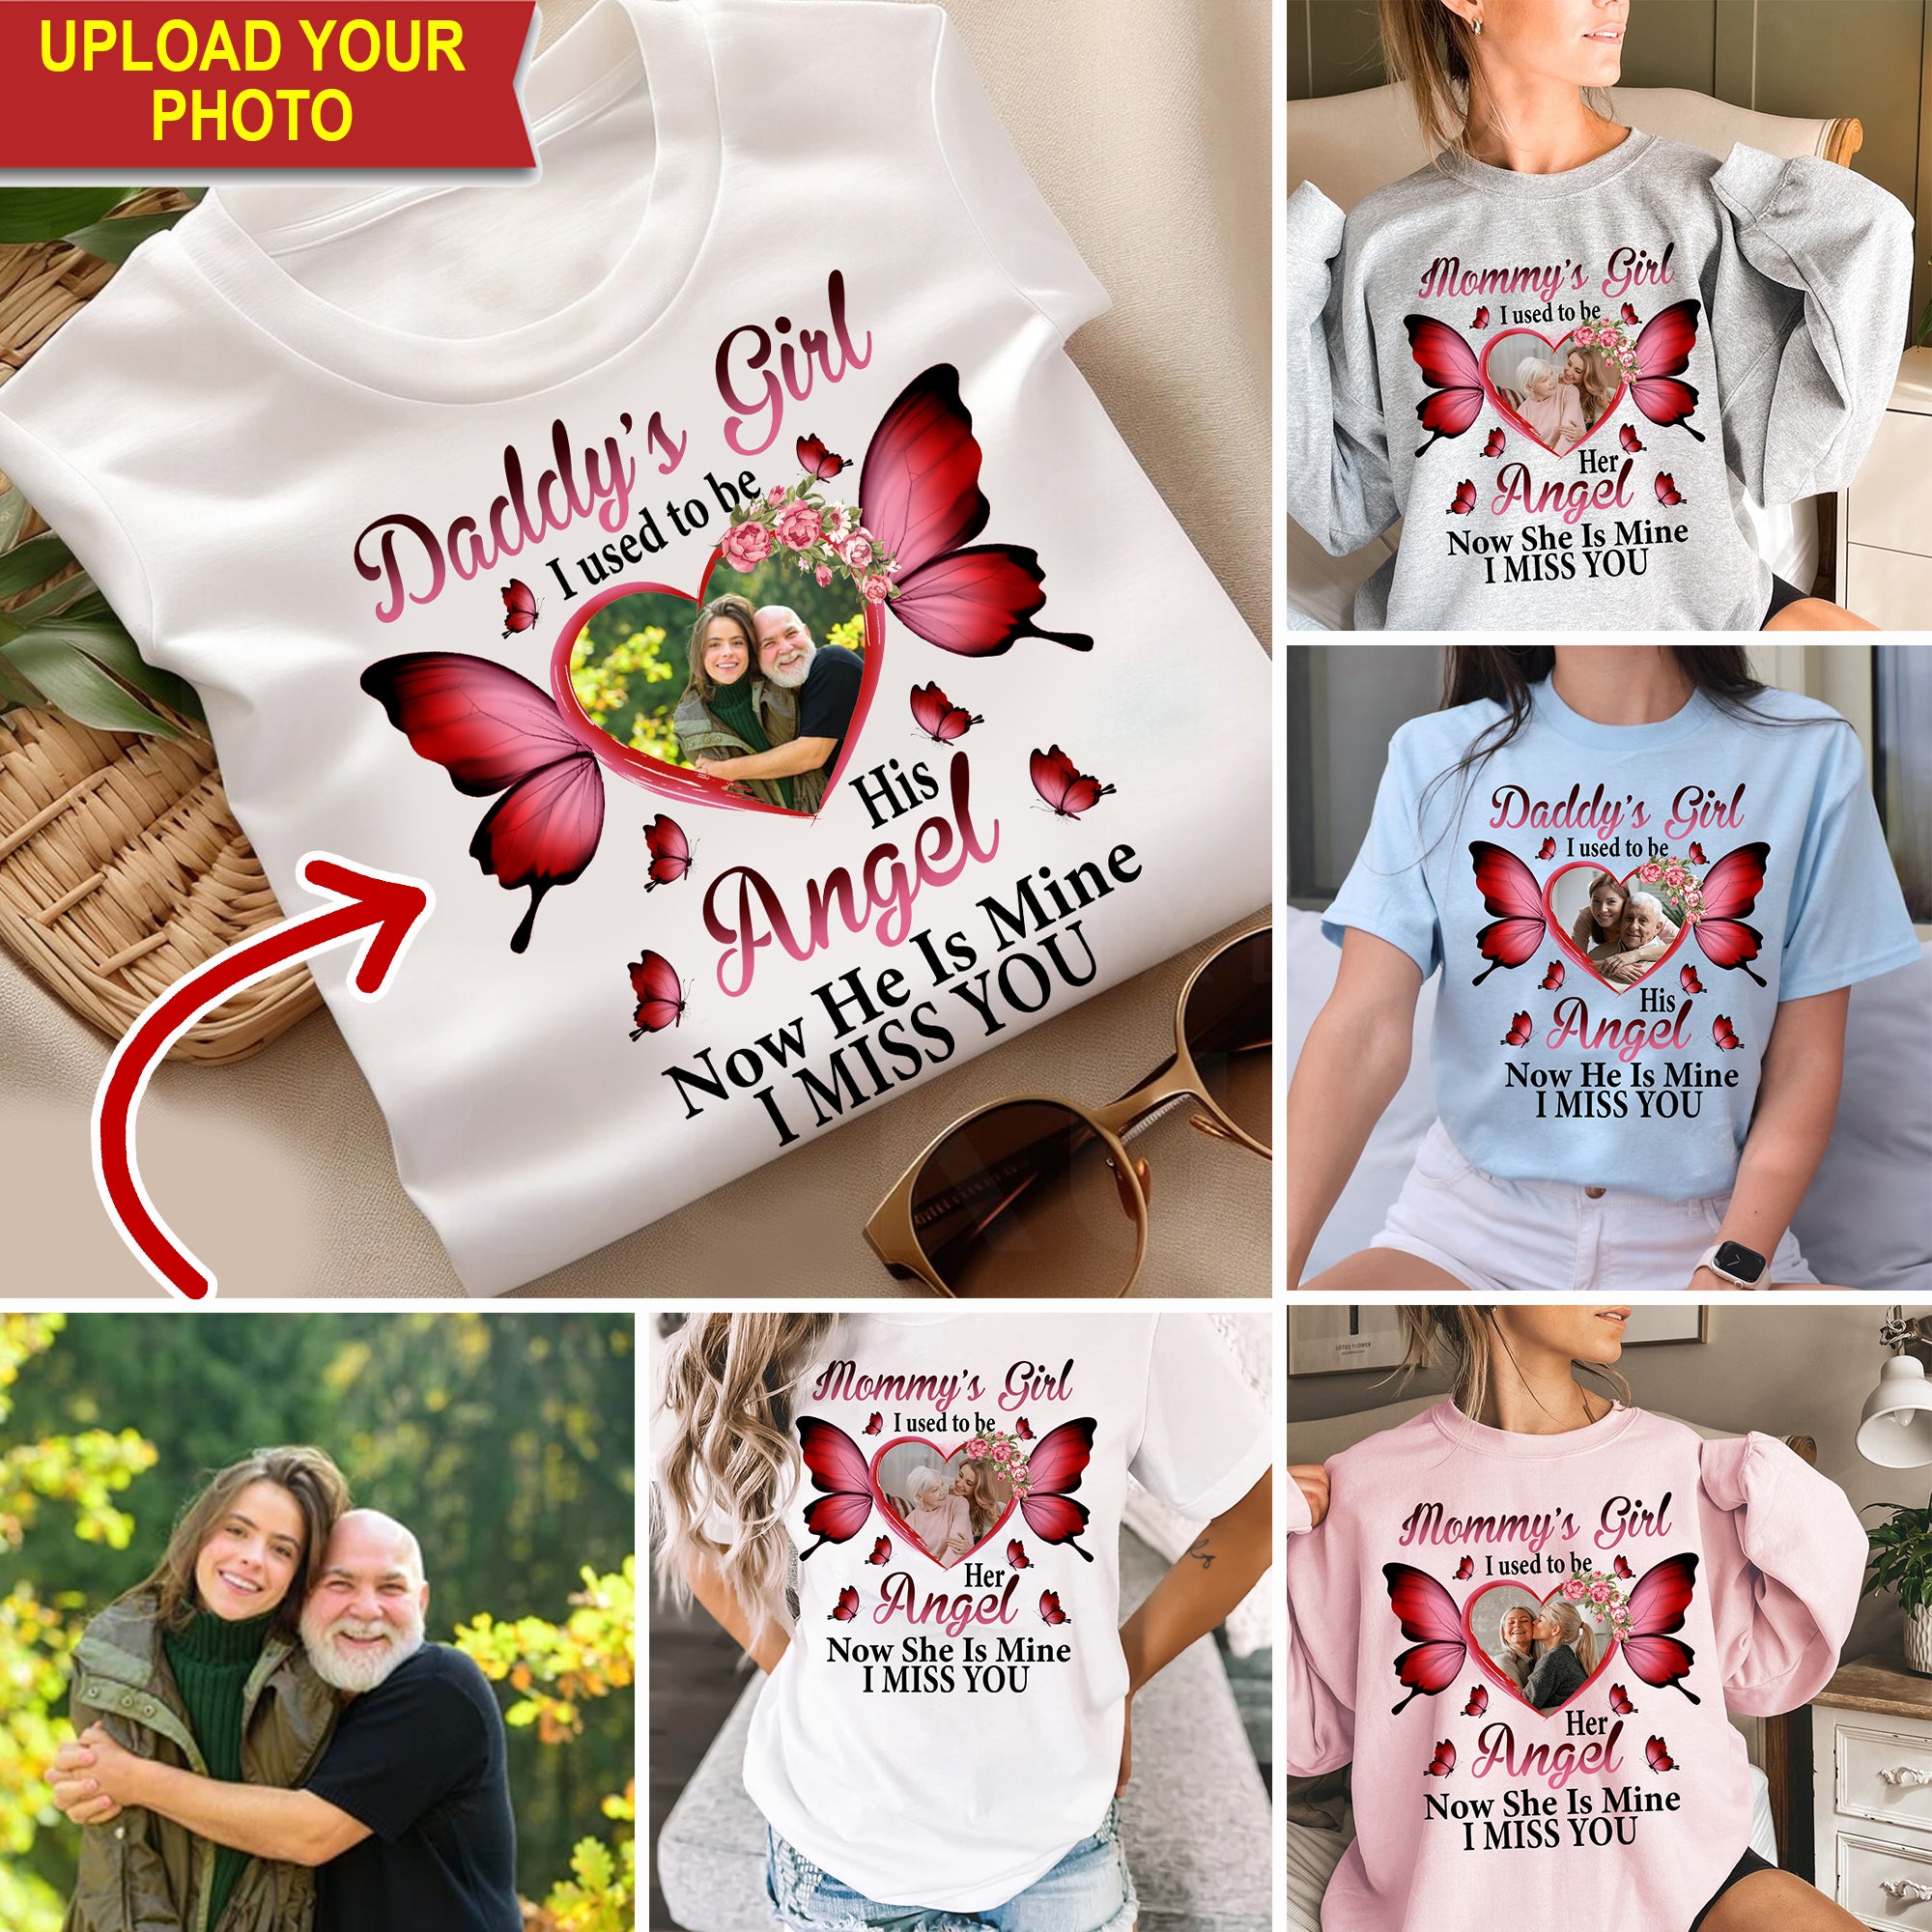 I Used To Be Mommy, Daddy Angel, I Miss You - Custom Photo - Personalized T-Shirt - Memorial Gift